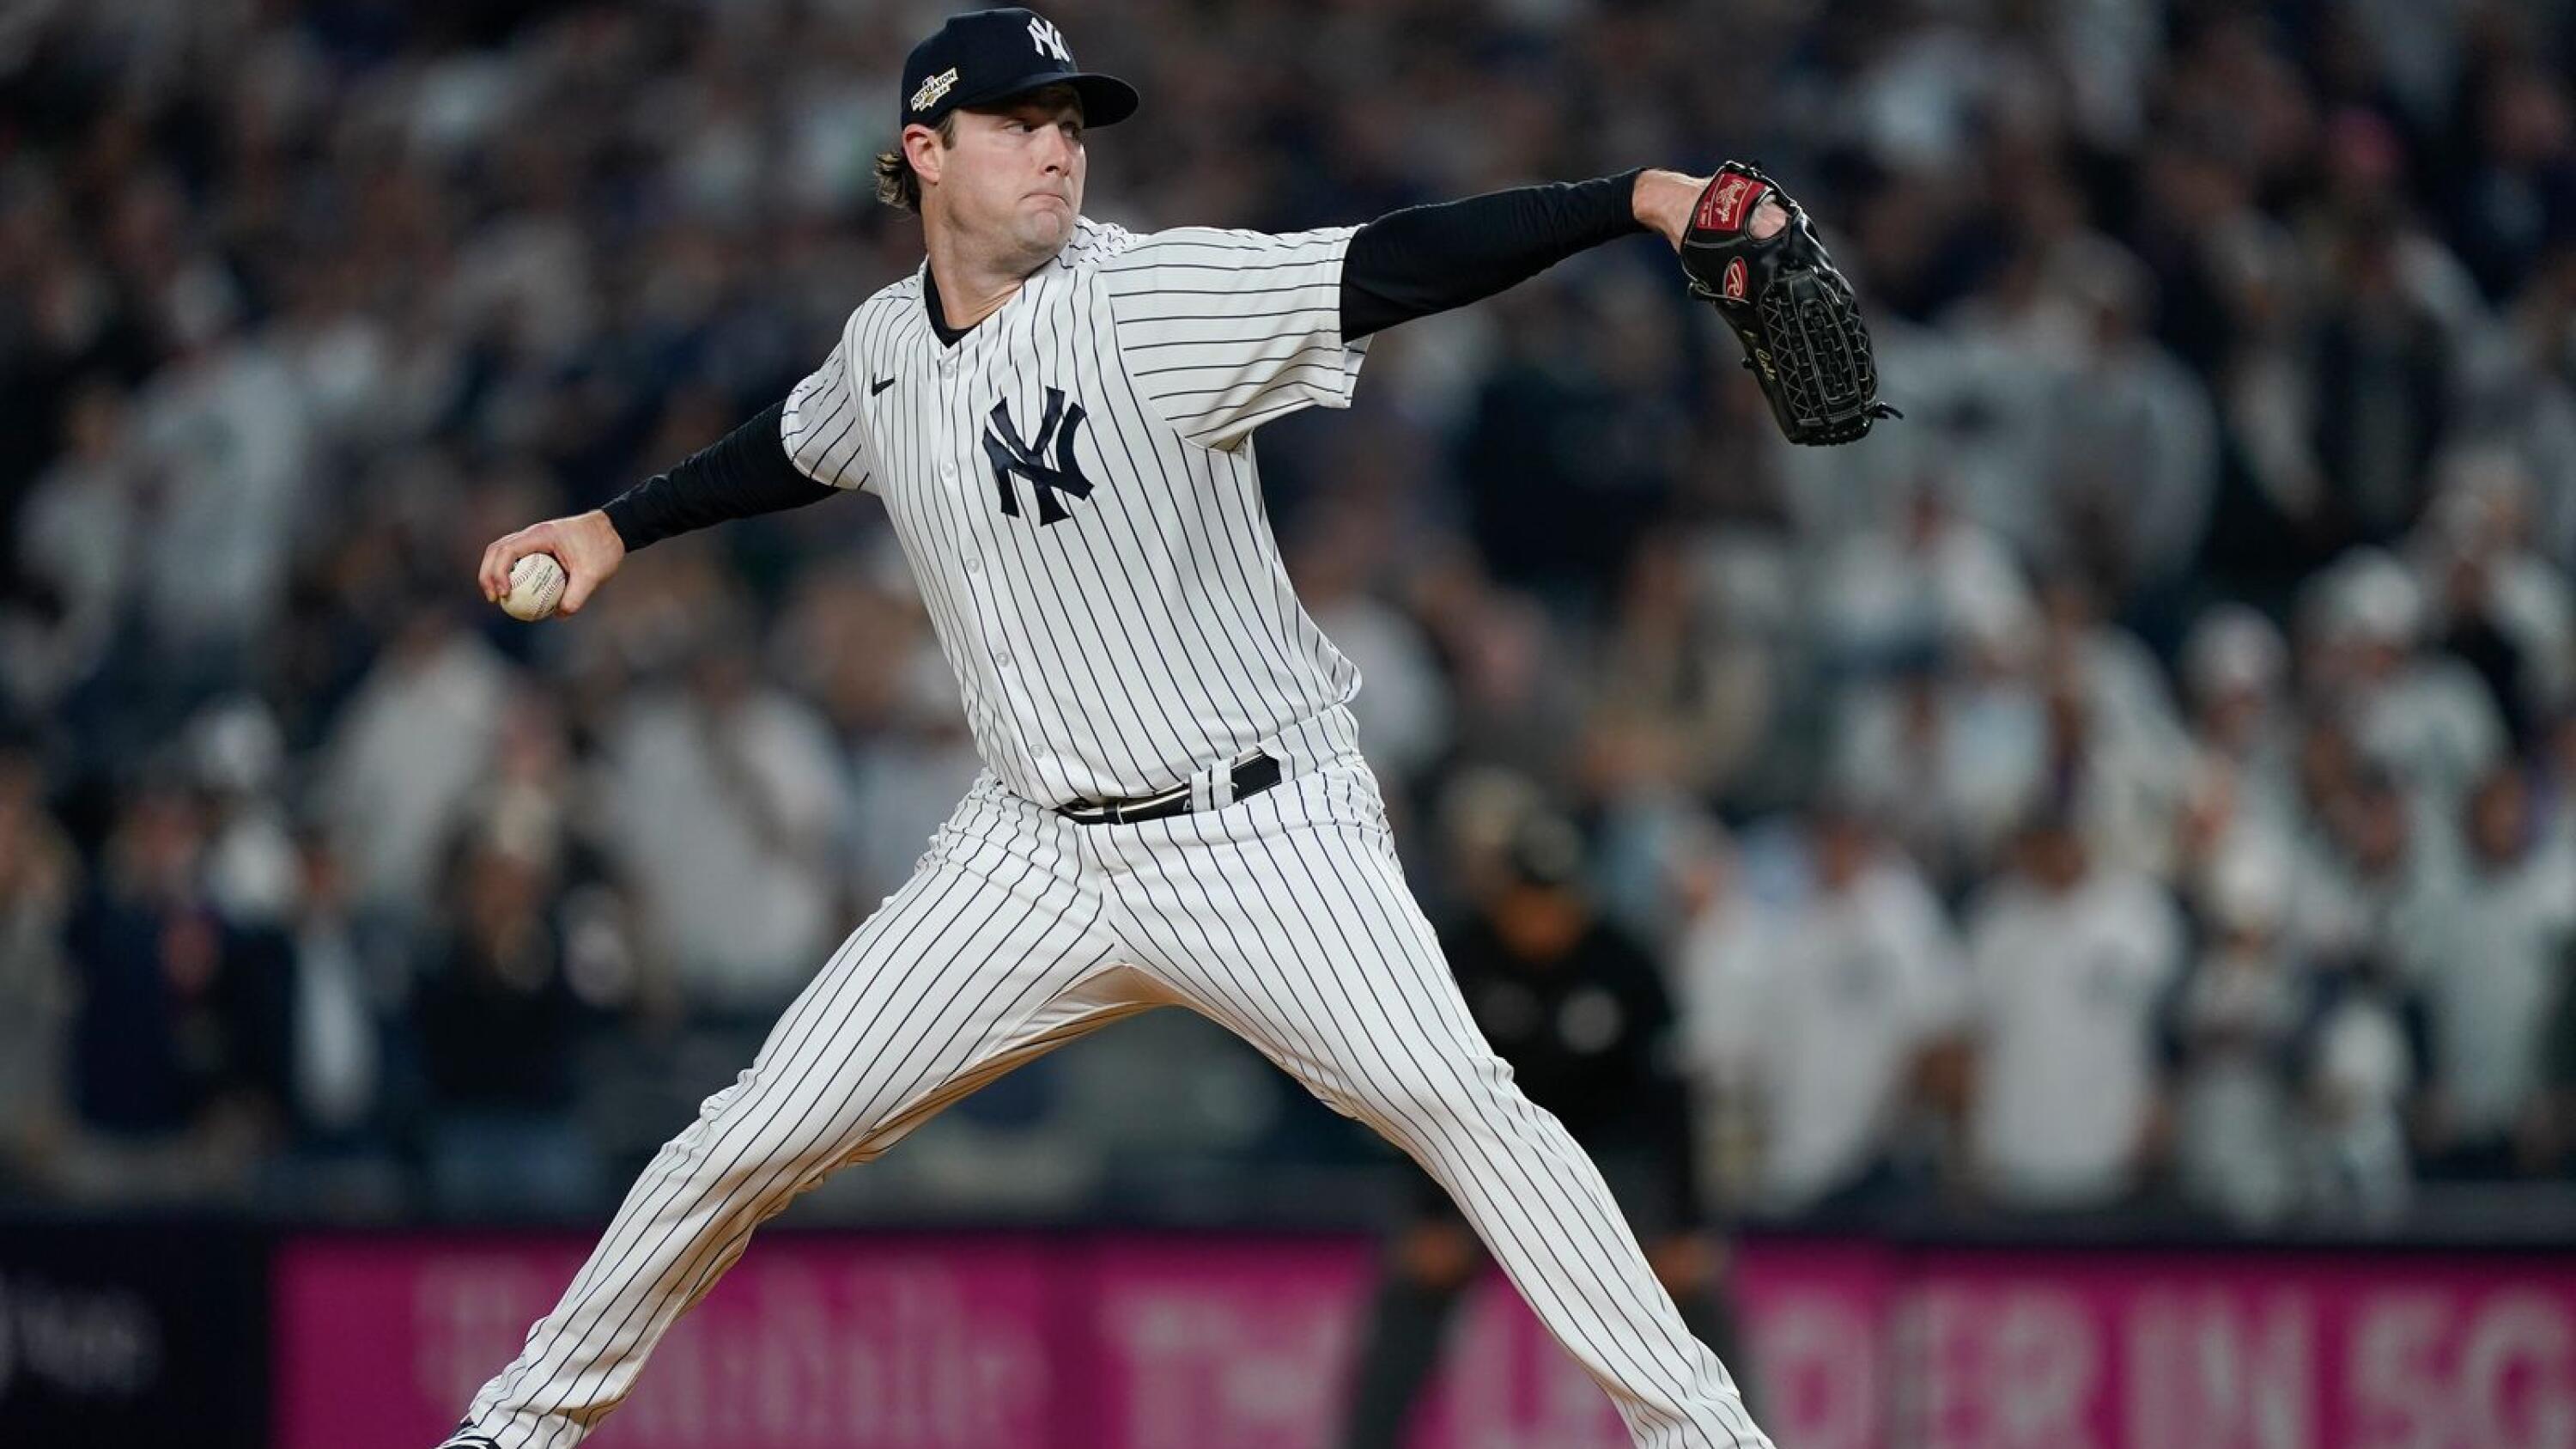 Aaron Boone Wants Gerrit Cole Lined Up As Yankees' Game 1 Starter